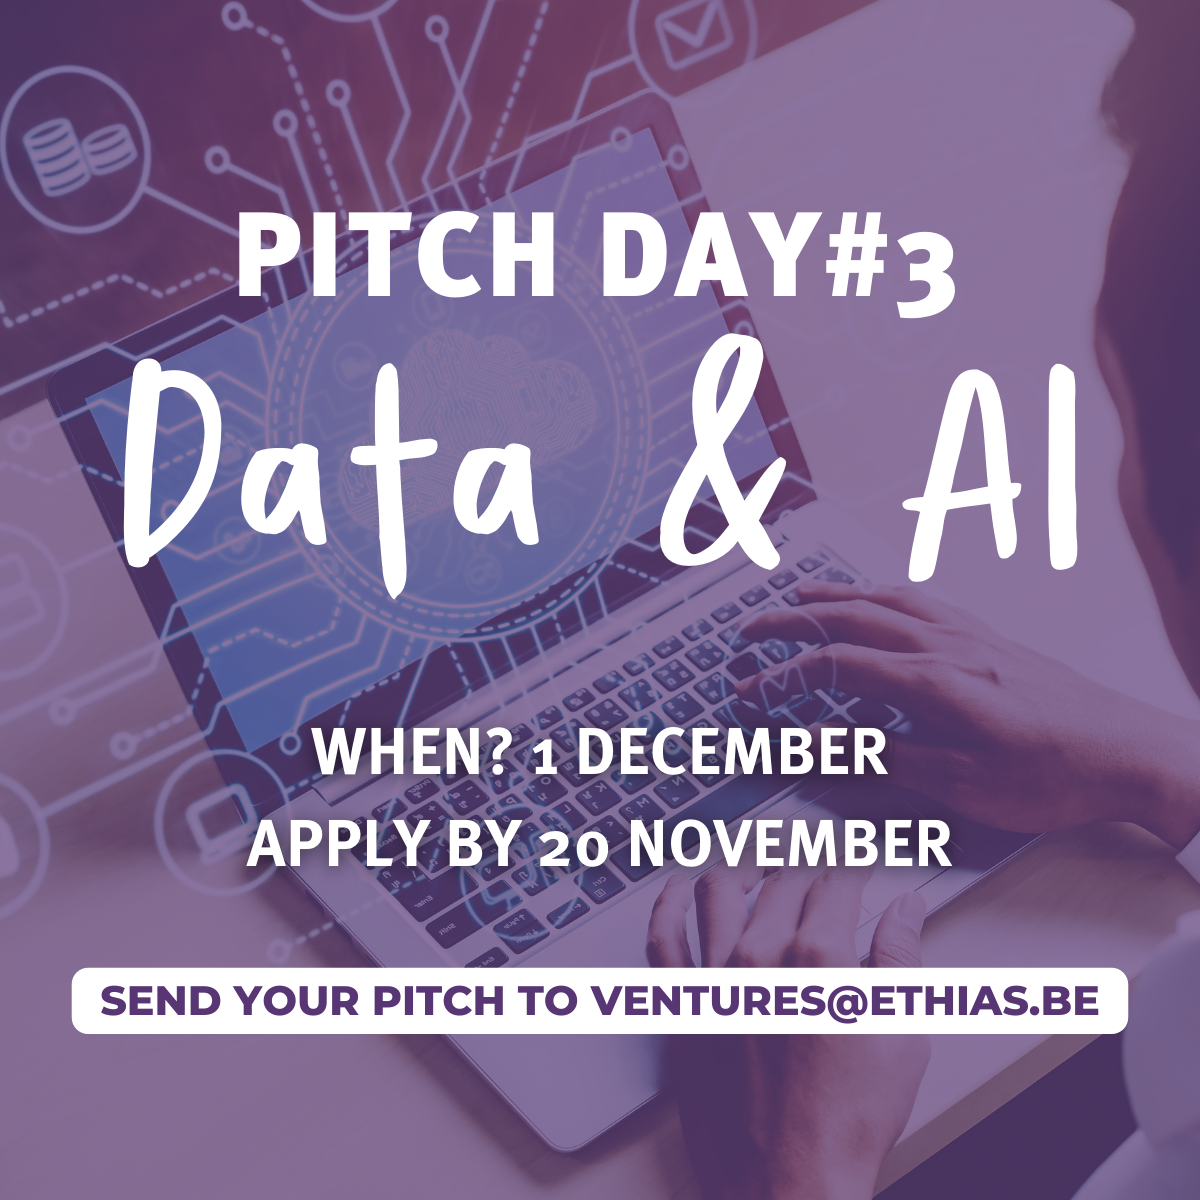 Pitch day 3